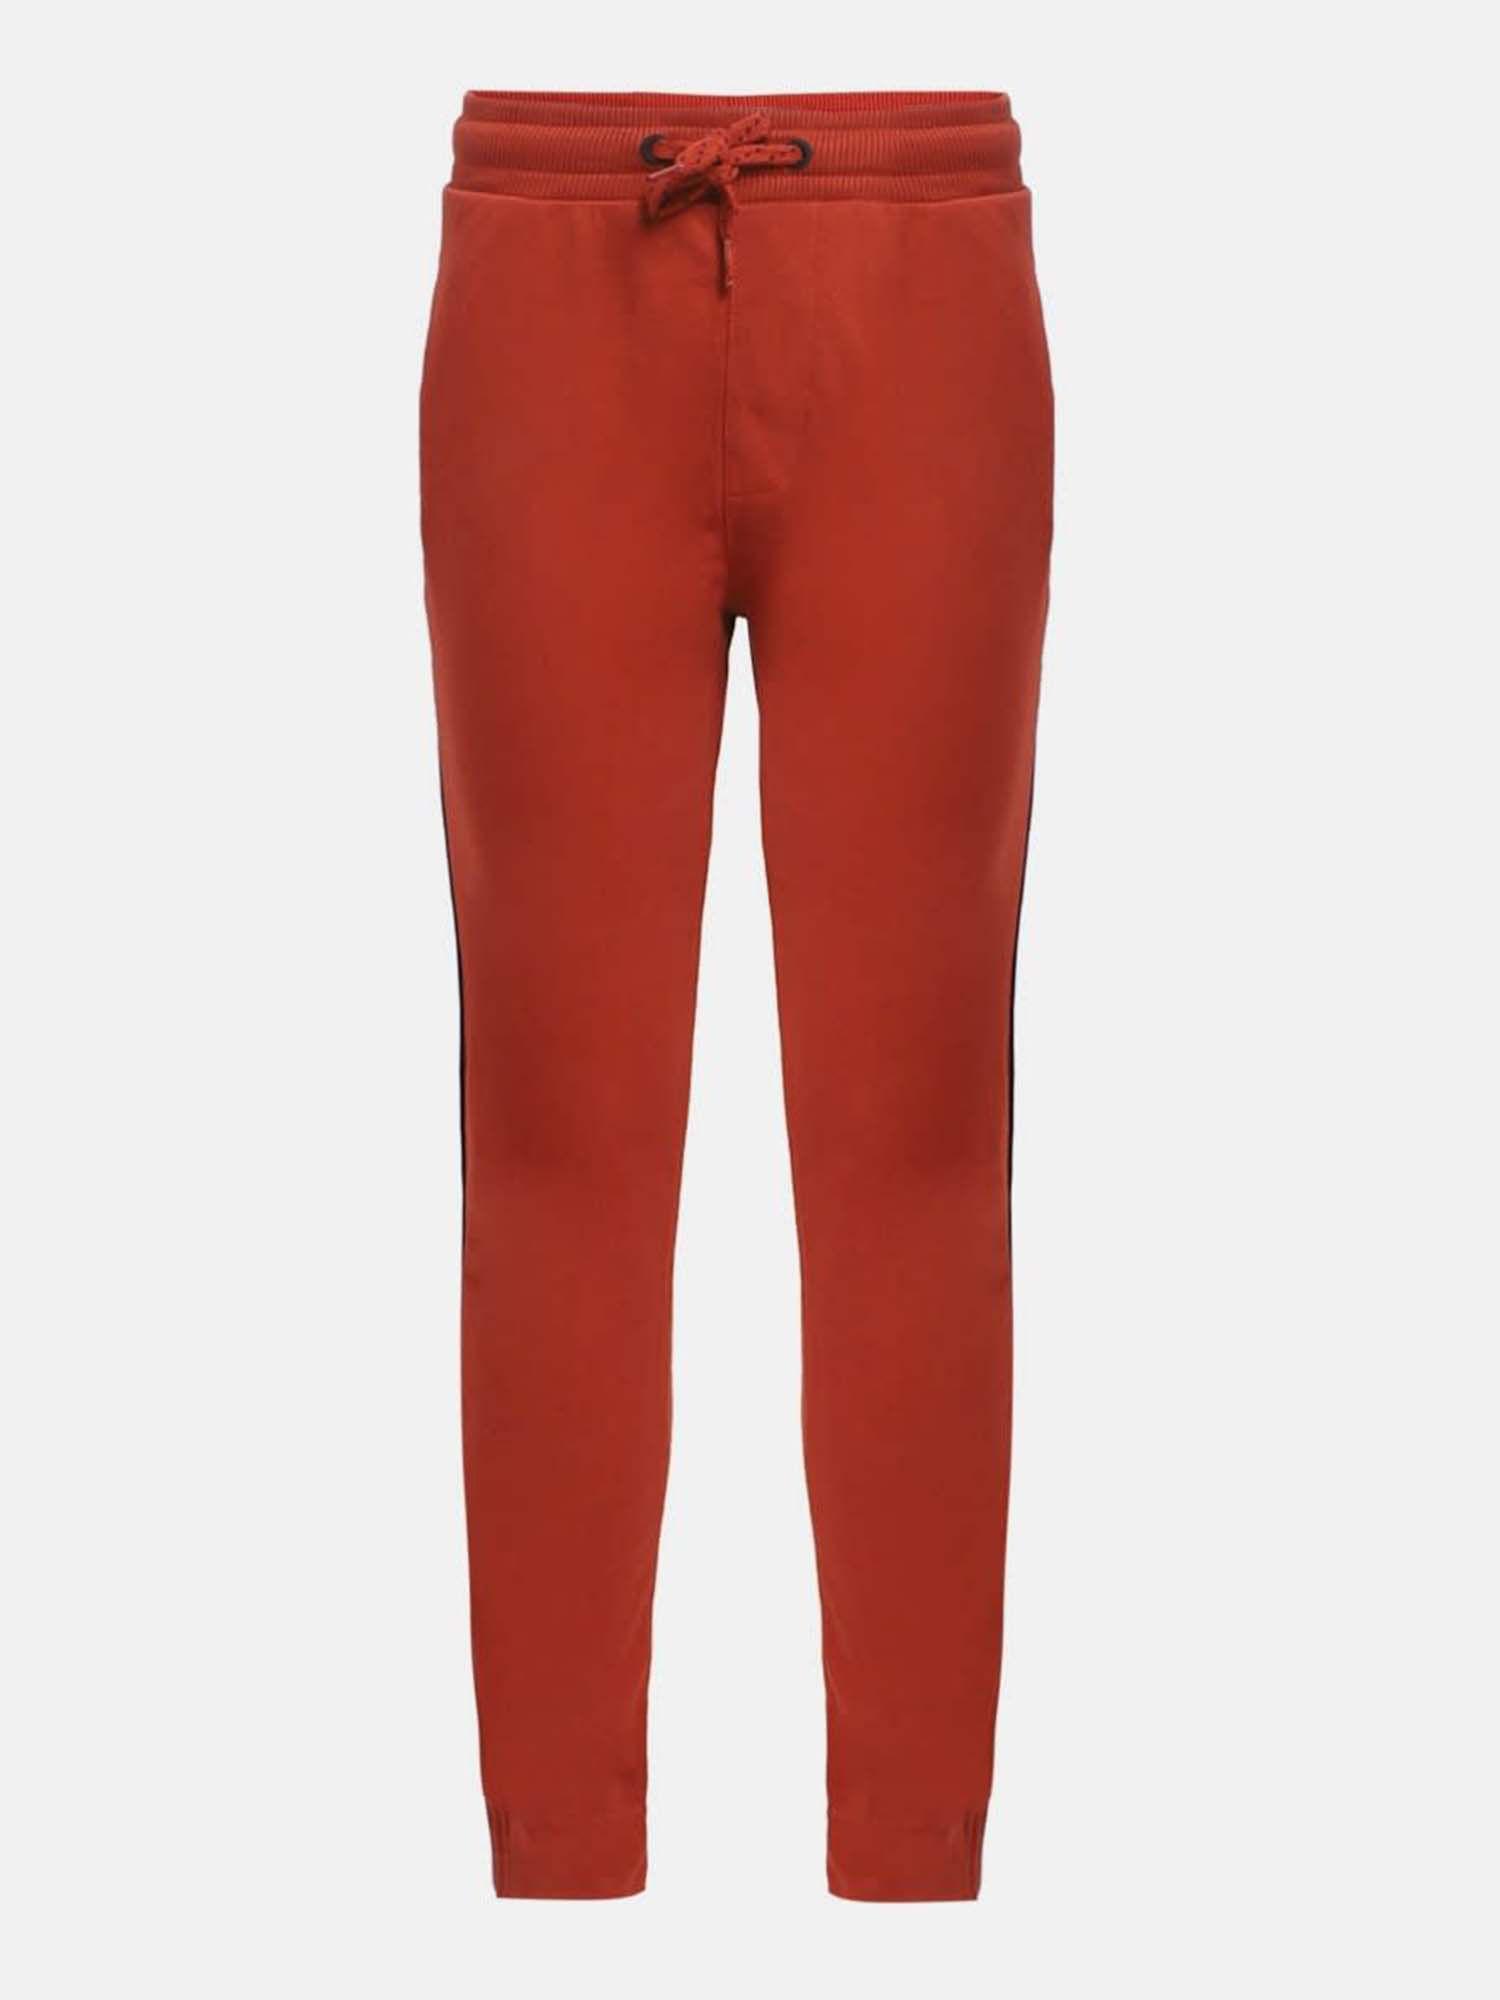 cinnabar track pant - style number - (ab31)